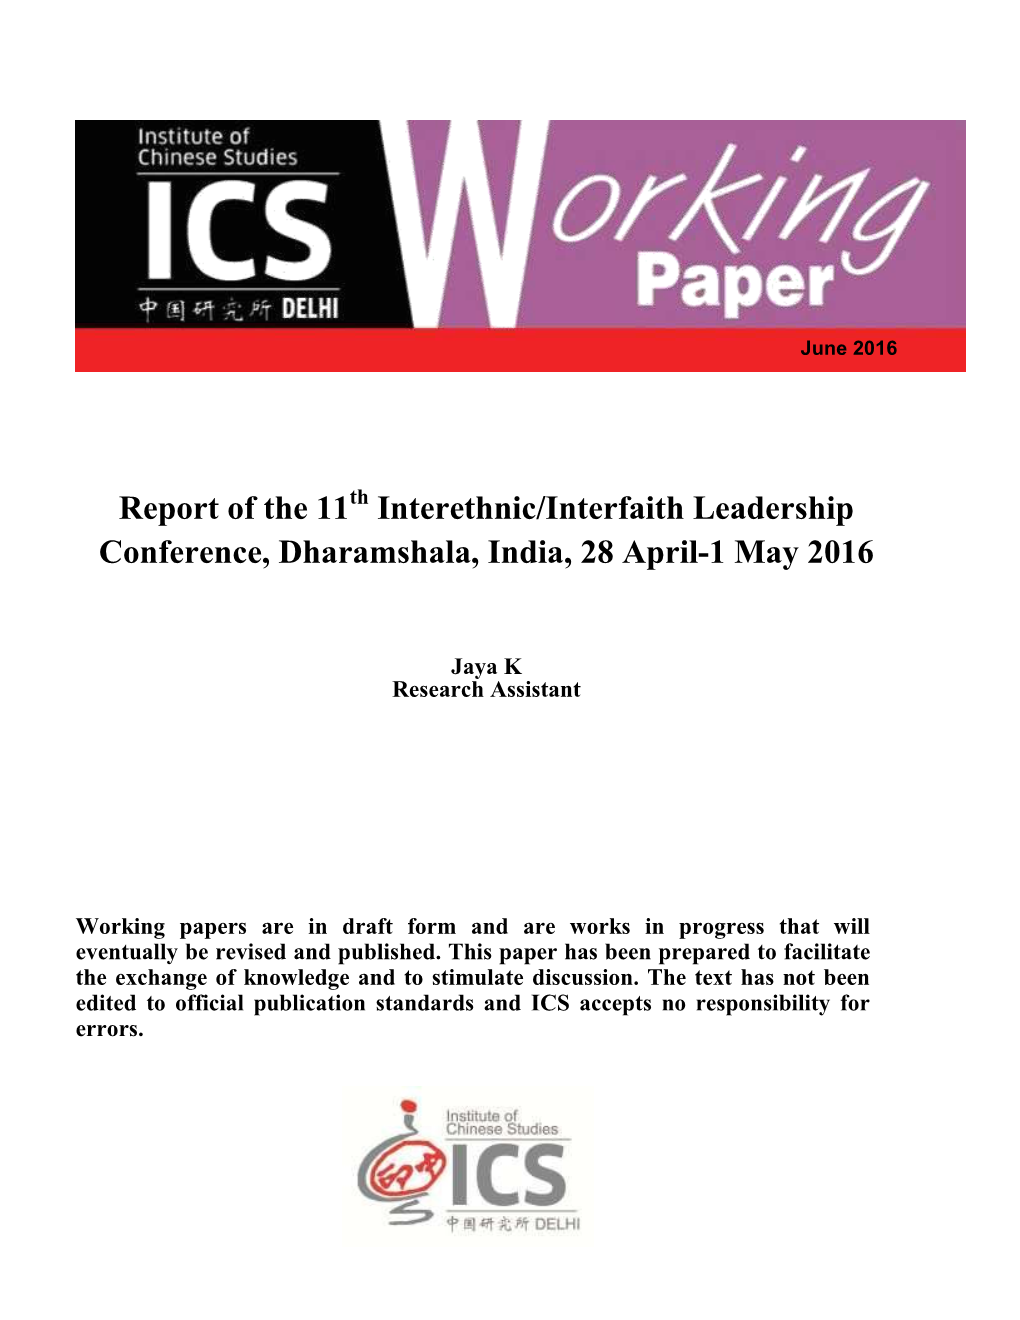 Report of the 11 Interethnic/Interfaith Leadership Conference